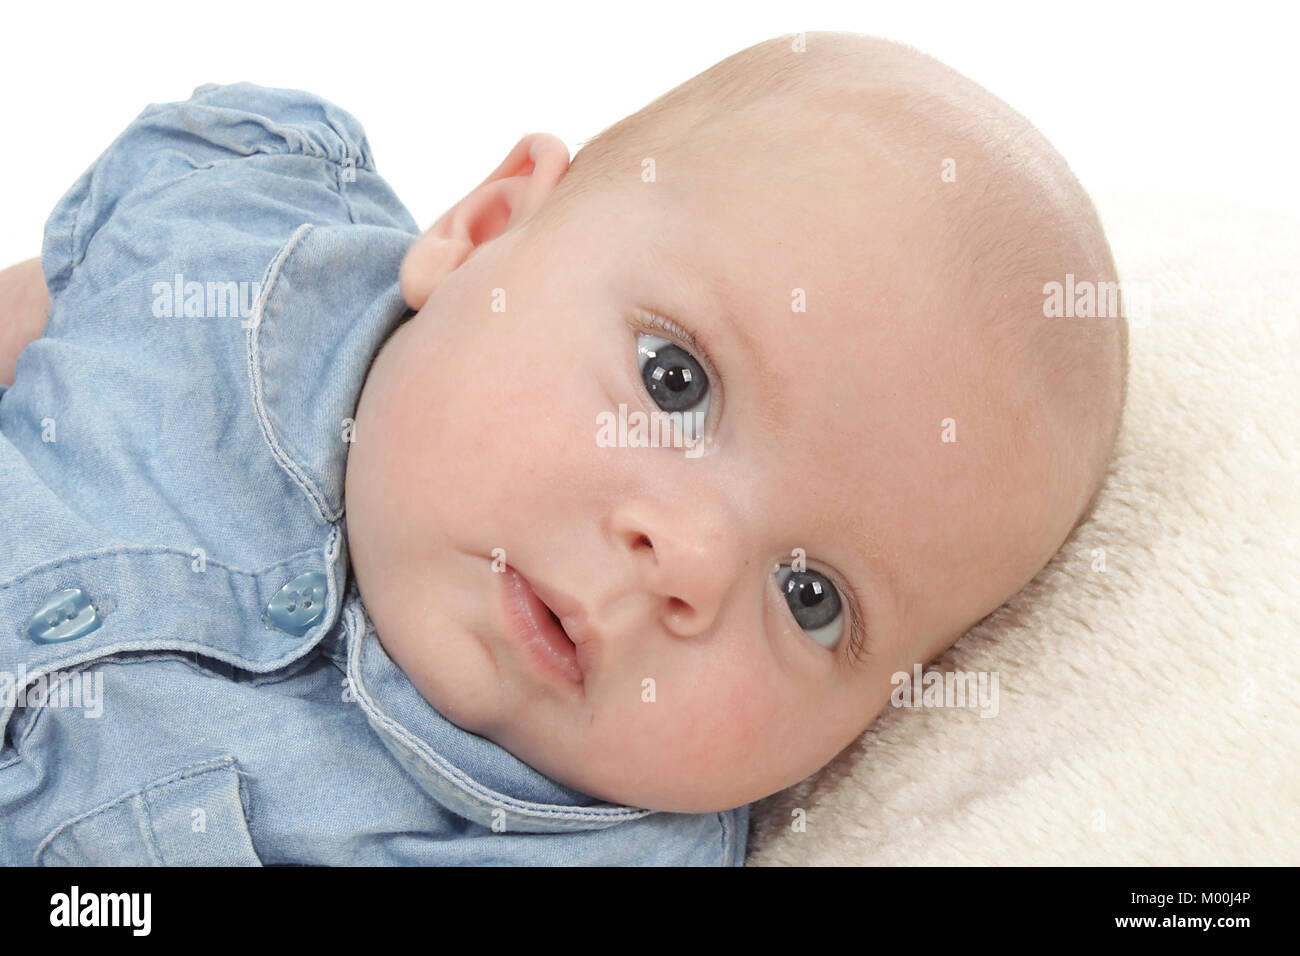 2 Month Old Baby Girl On Rug Pretty Little Girl Stock Photo Alamy